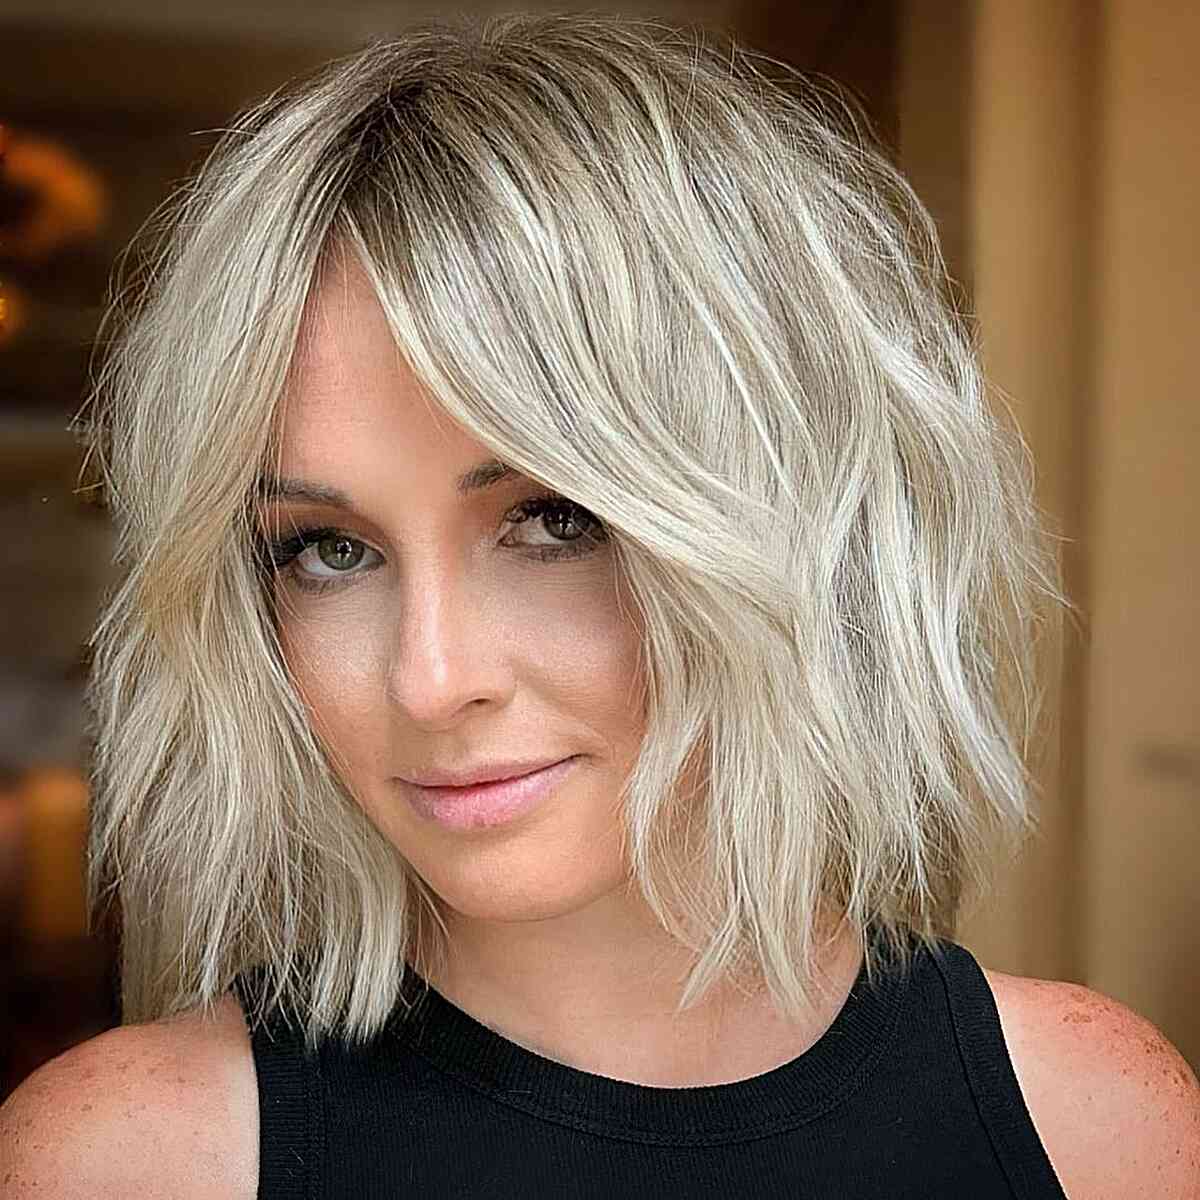 These 30 Short Shaggy Bob Haircuts Are The On-Trend Look Right Now